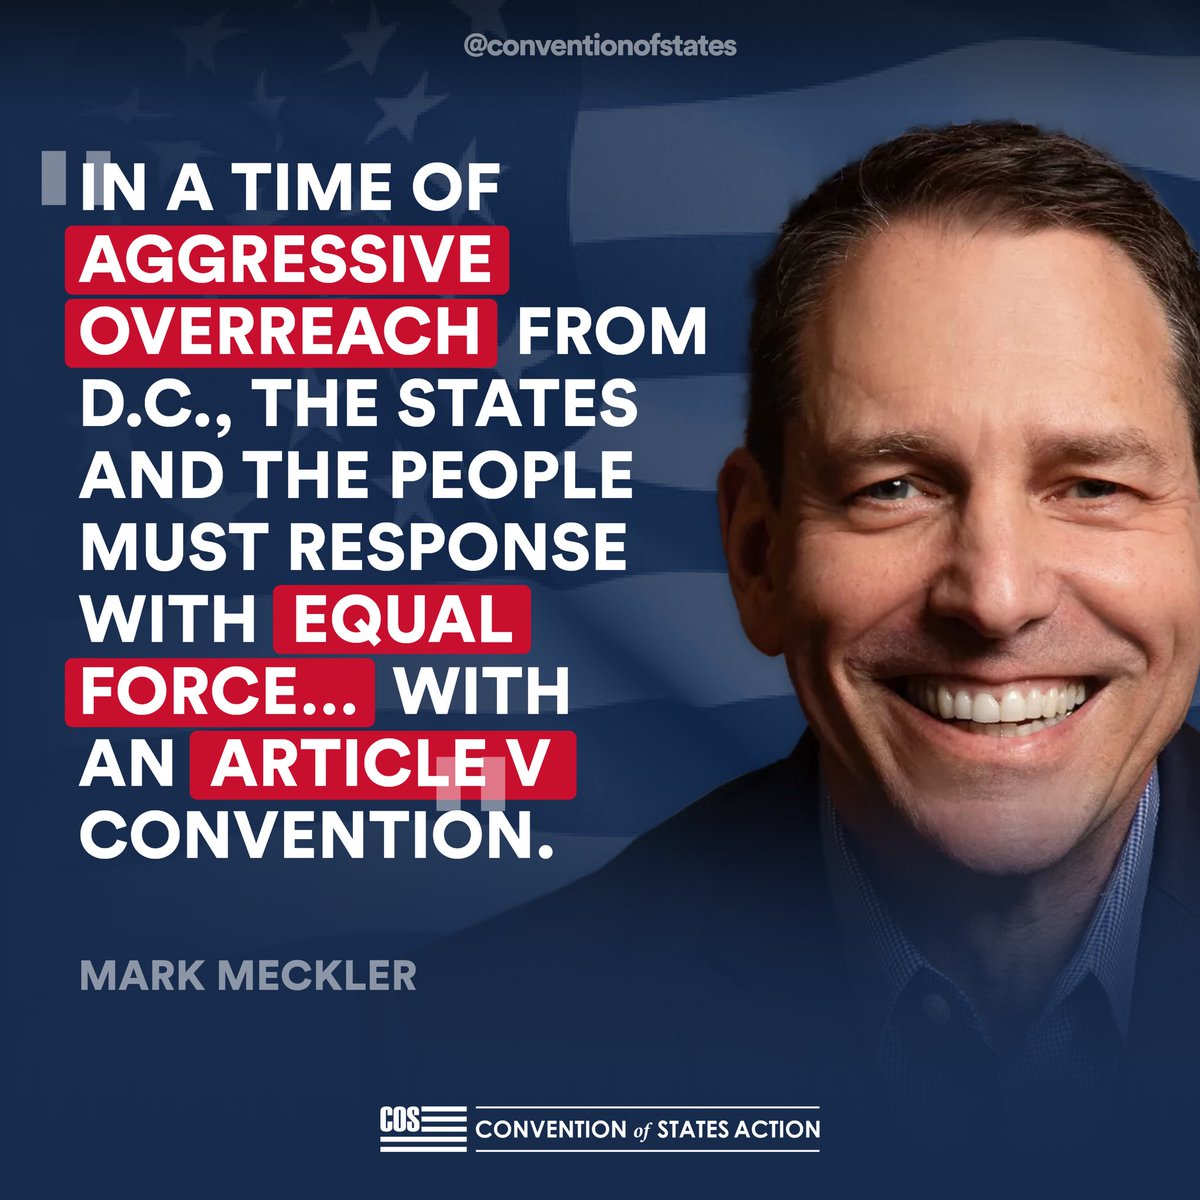 We need to respond to the tyrannical D.C. bureaucracy with an #ArticleV convention! @MarkMeckler